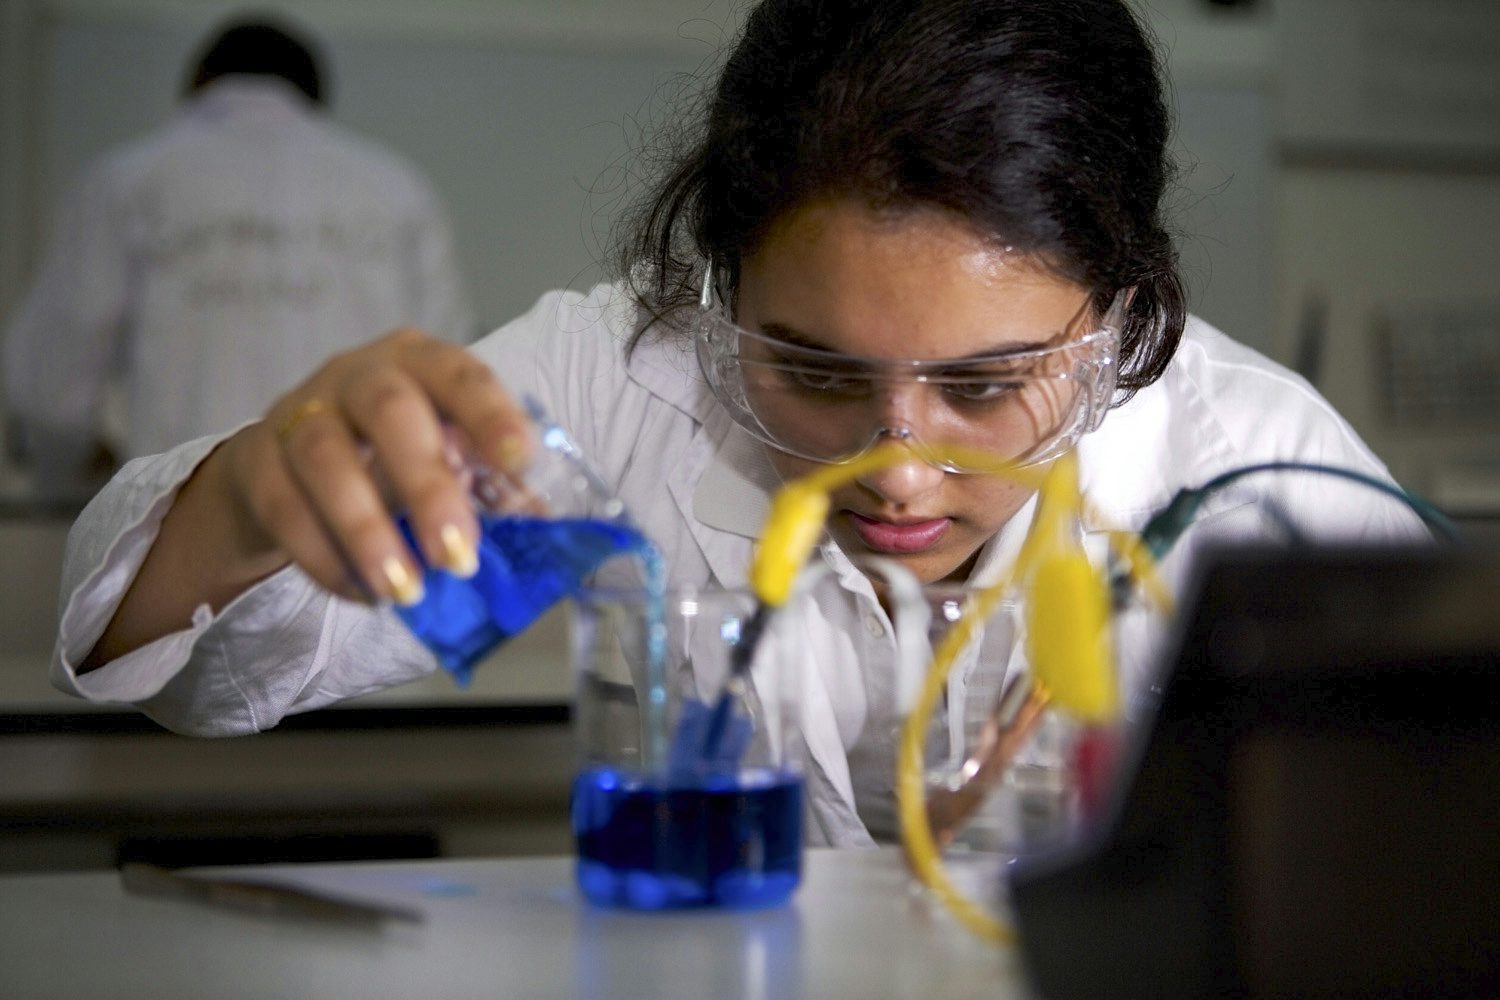 A girl is carefully pouring a blue liquid into a glass as part of a chemistry experiment